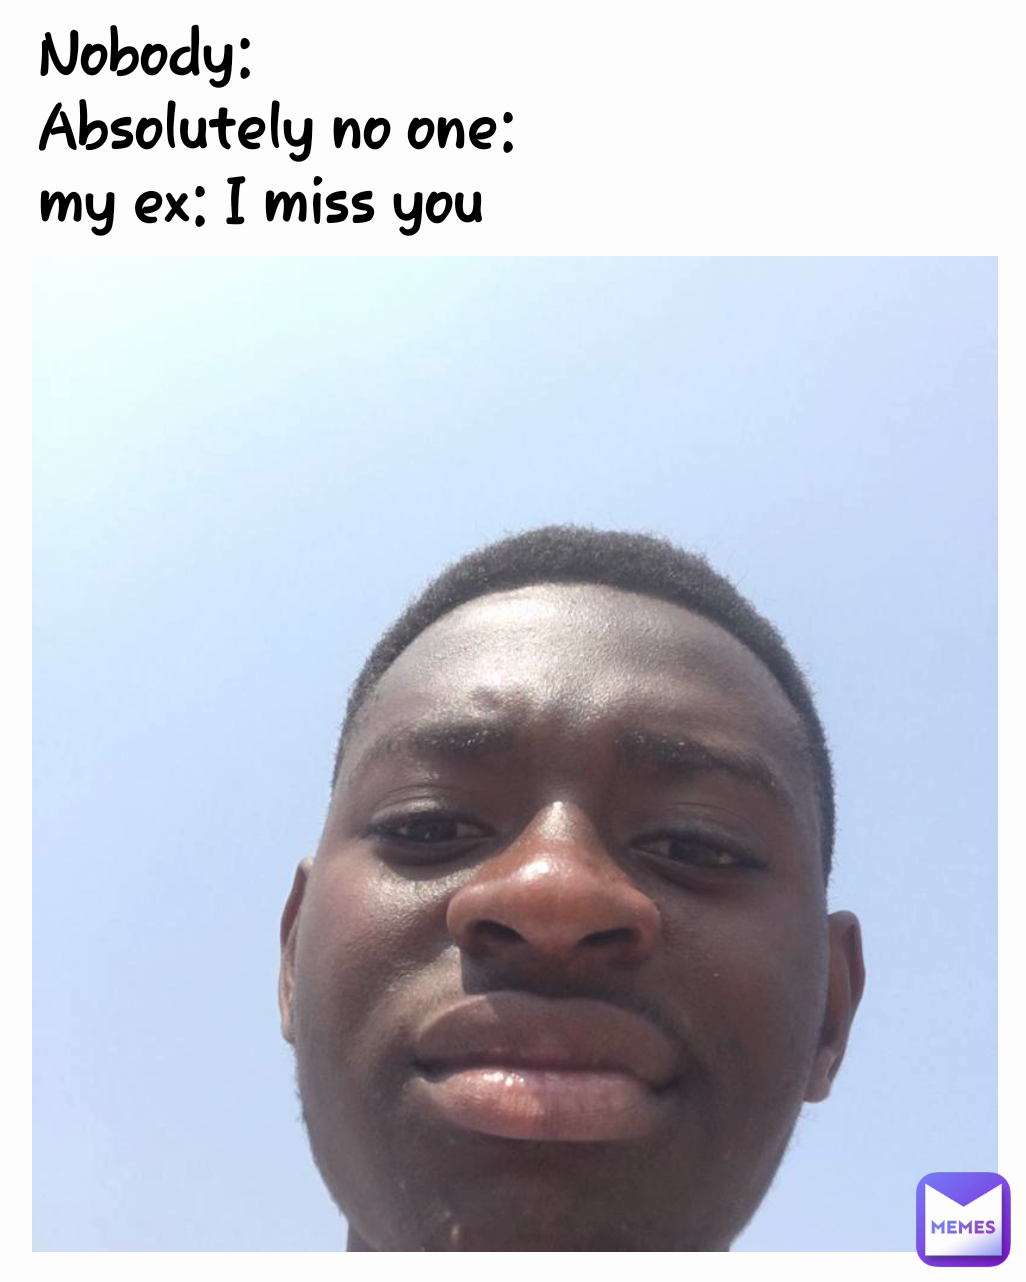 Nobody: 
Absolutely no one:
my ex: I miss you 